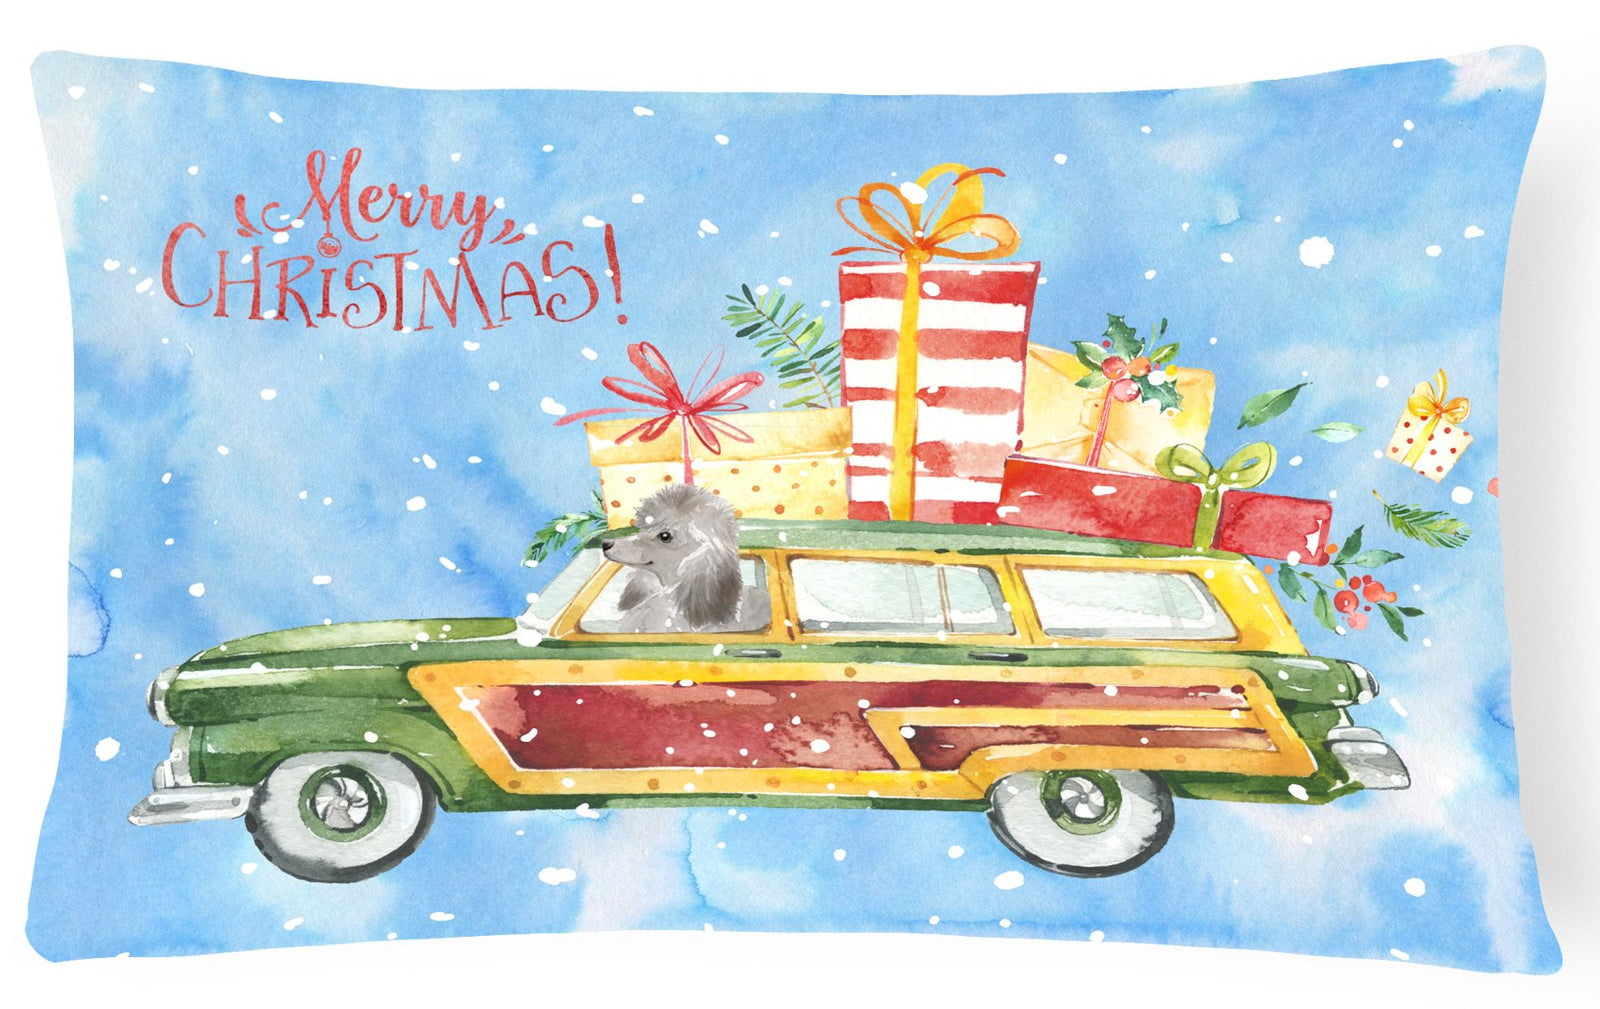 Merry Christmas Silver Poodle Canvas Fabric Decorative Pillow CK2457PW1216 by Caroline's Treasures